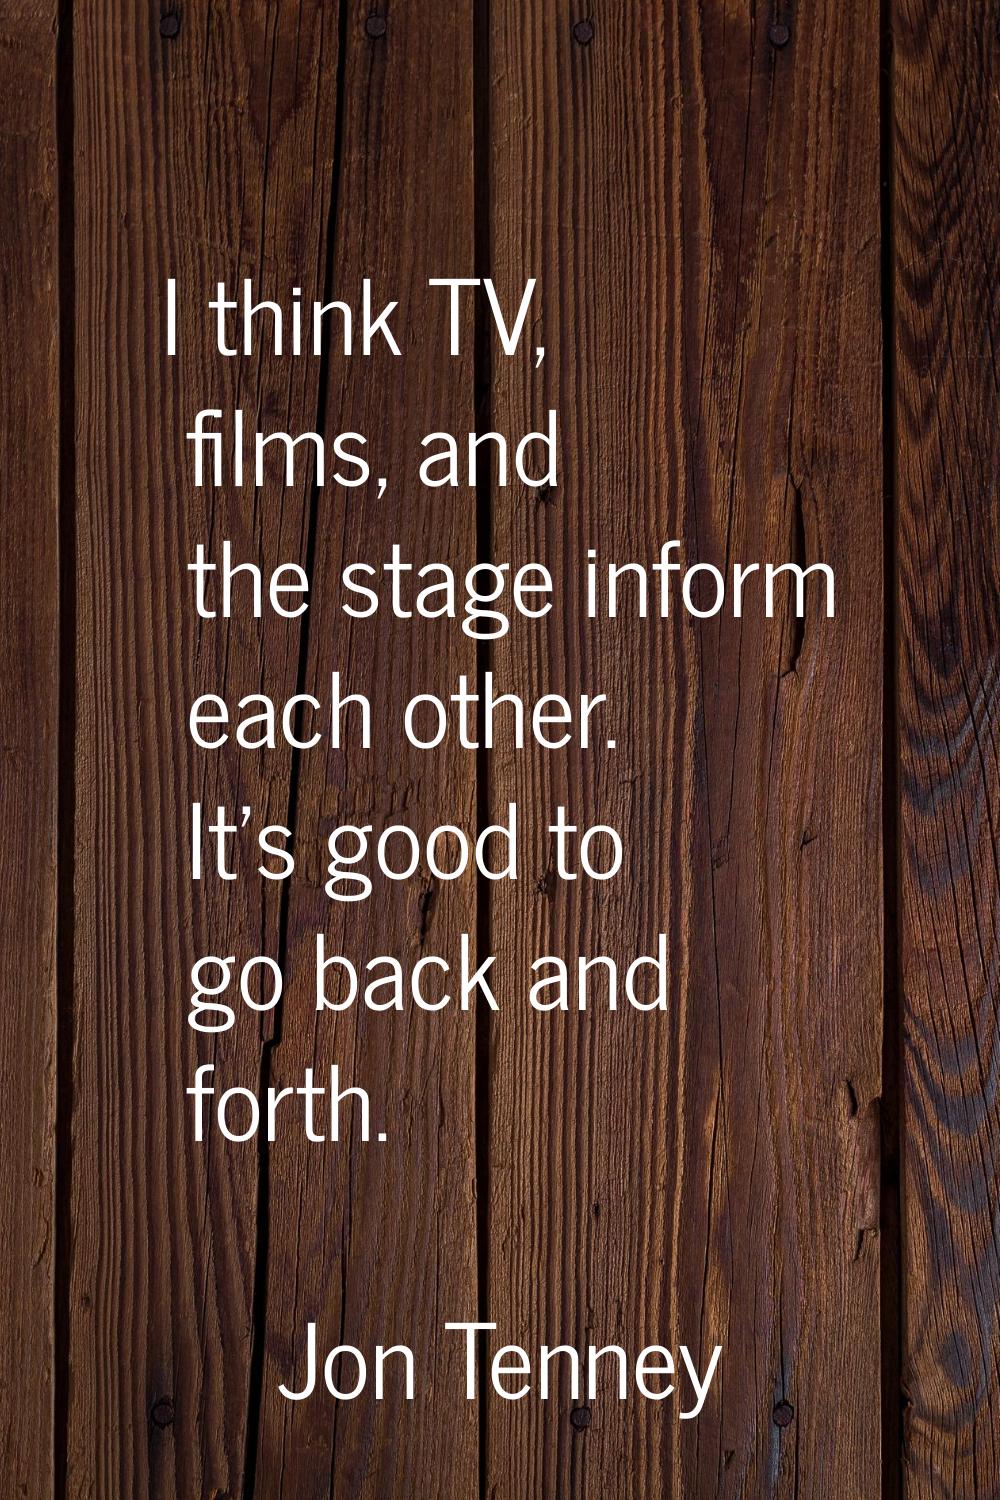 I think TV, films, and the stage inform each other. It's good to go back and forth.